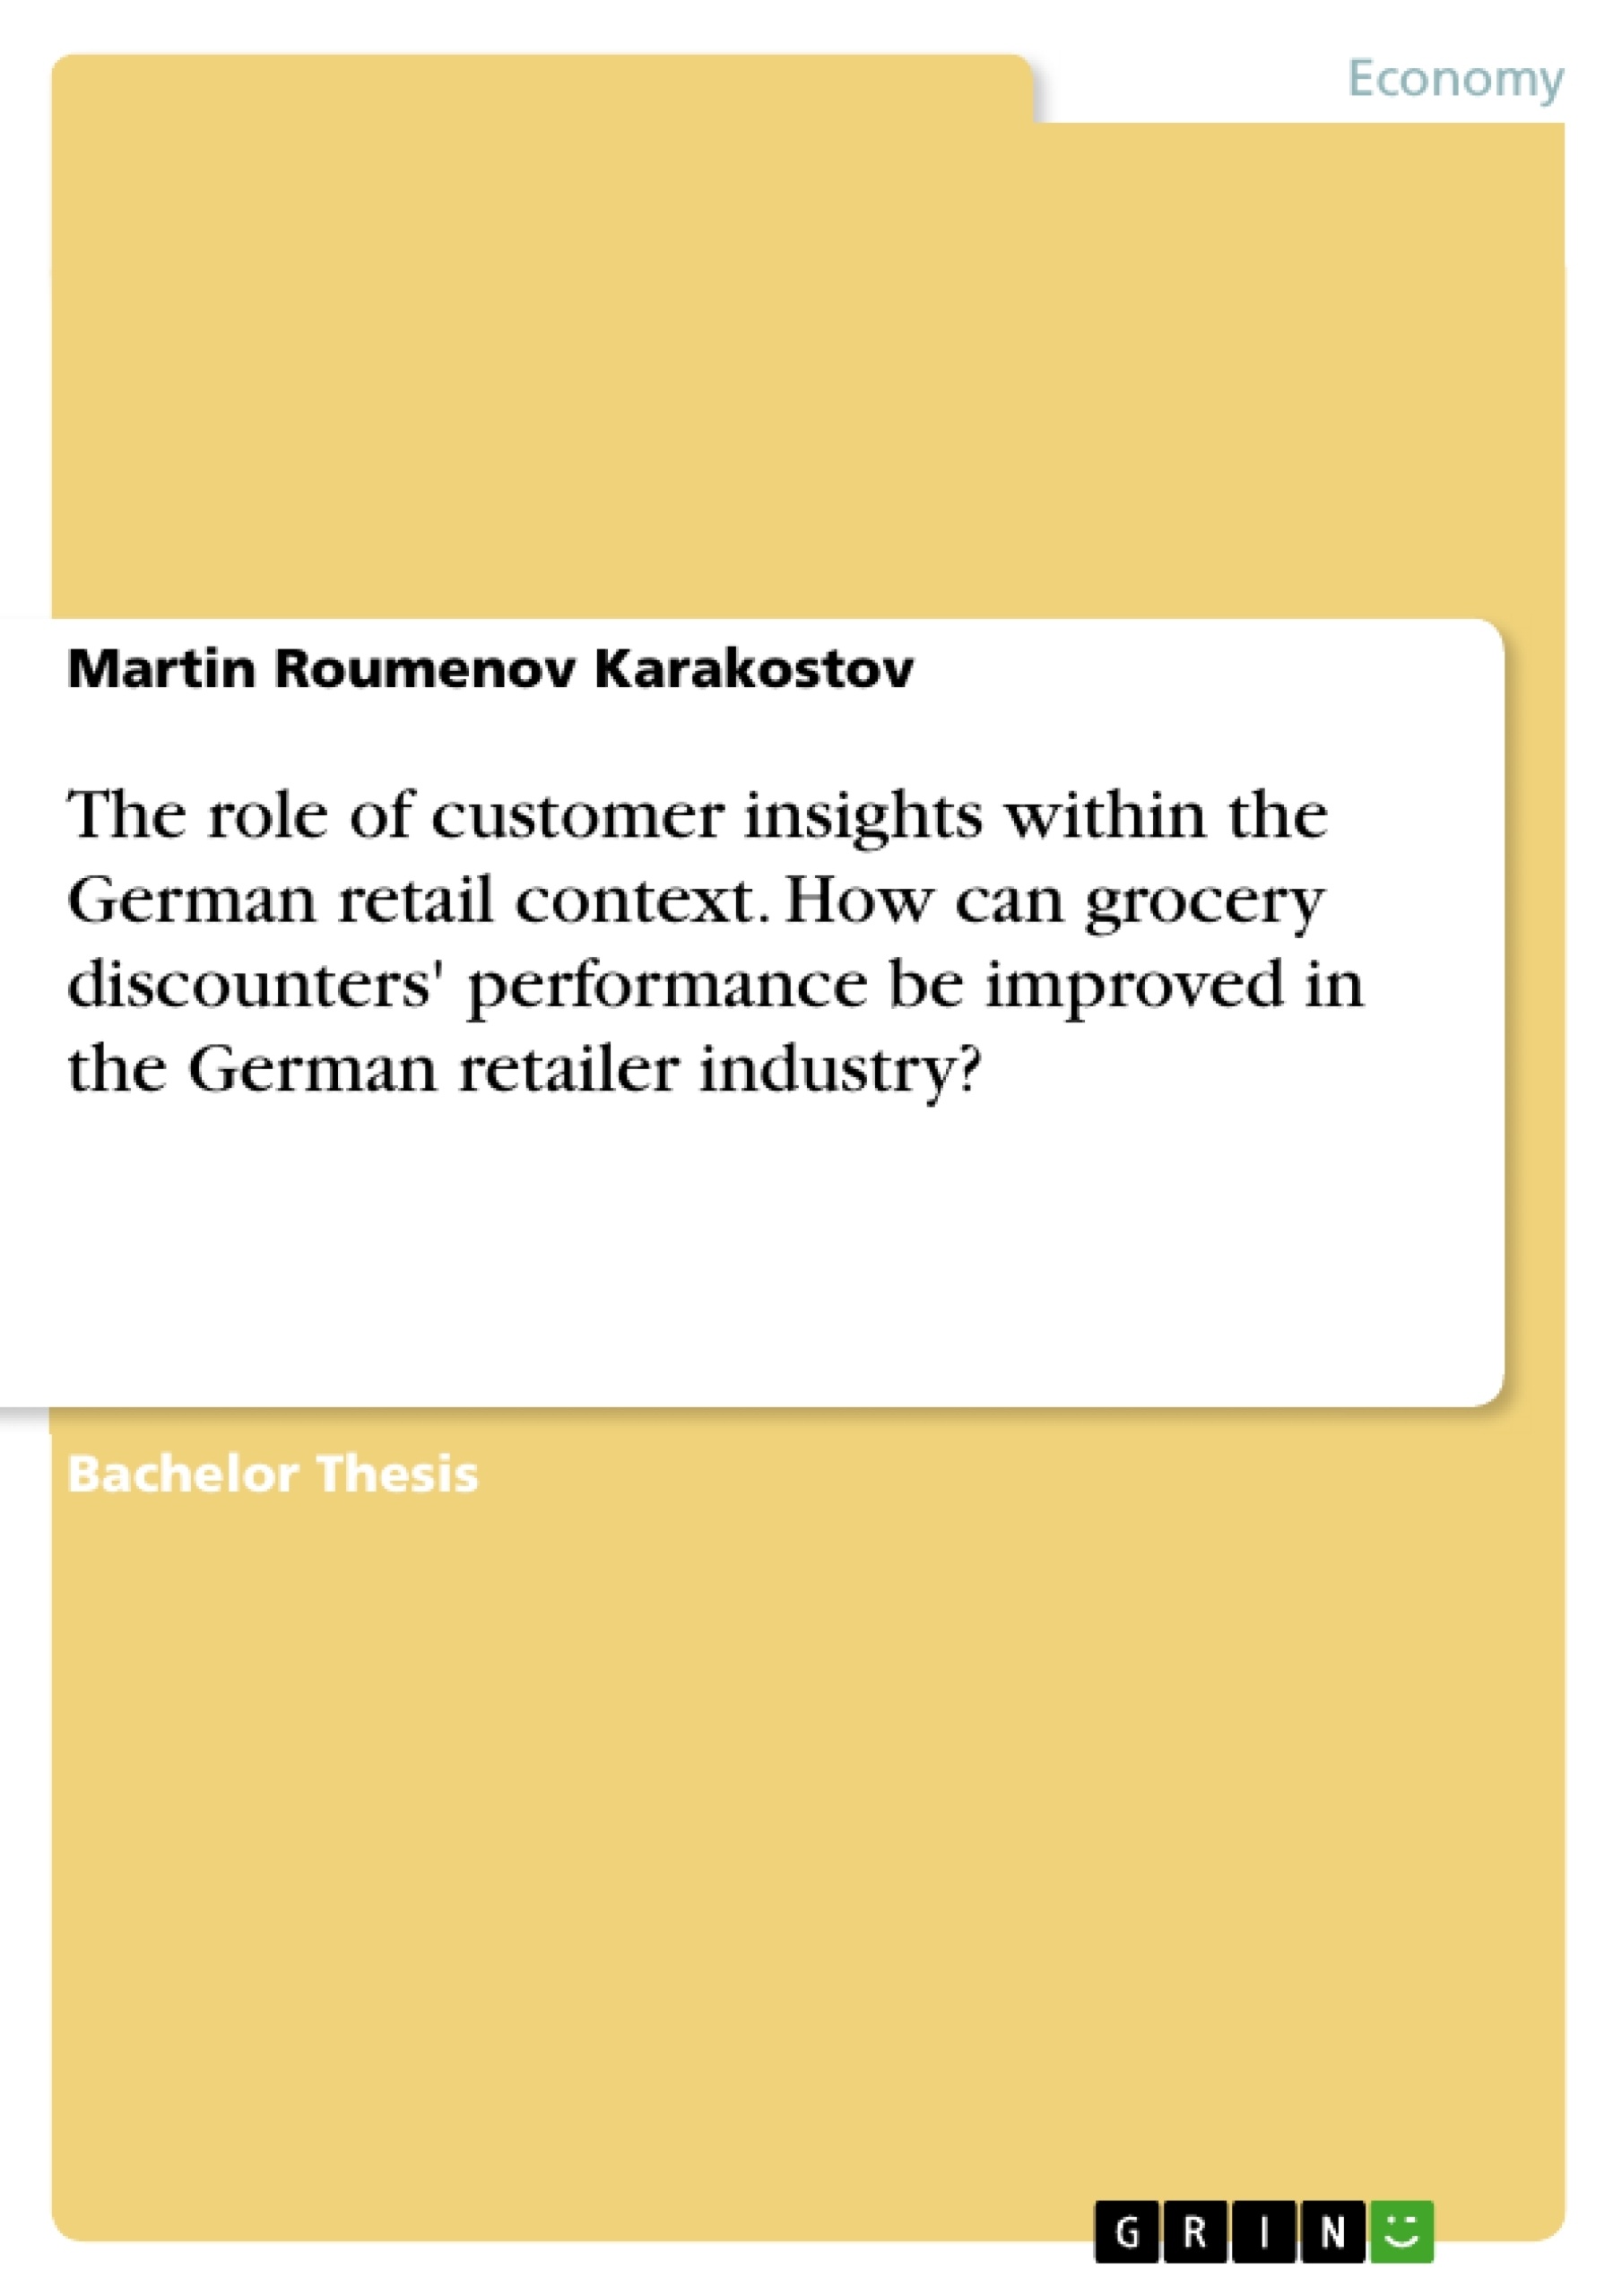 Título: The role of customer insights within the German retail context. How can grocery discounters' performance be improved in the German retailer industry?